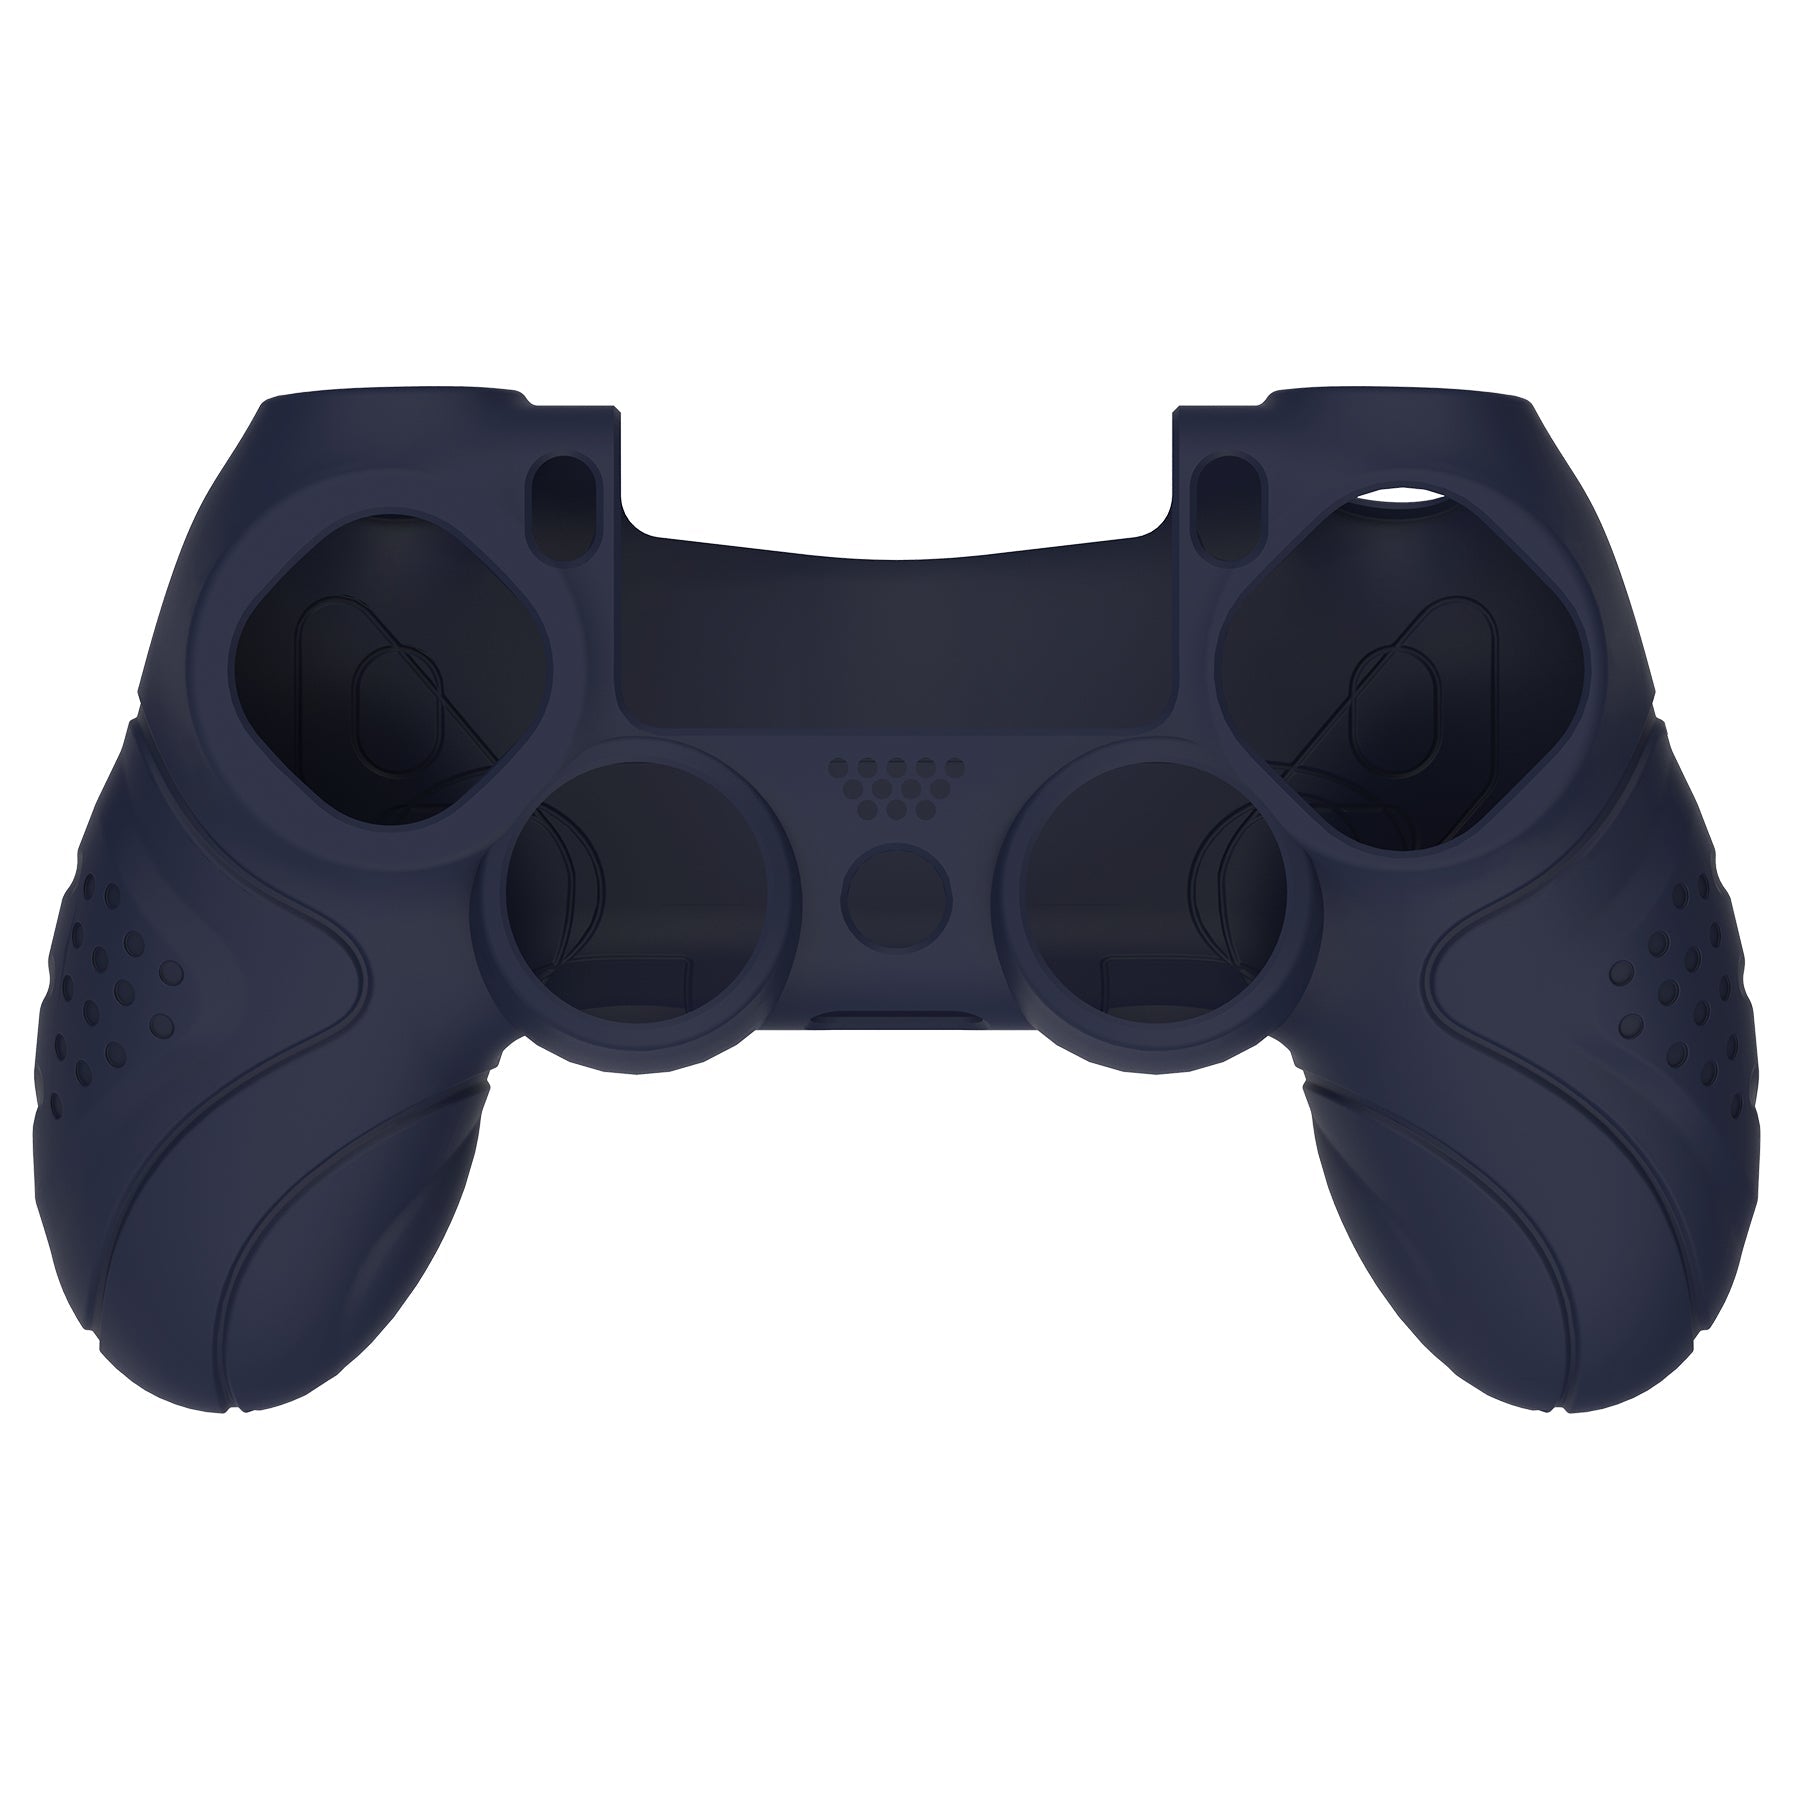 PlayVital Guardian Edition Midnight Blue Ergonomic Soft Anti-Slip Controller Silicone Case Cover for PS4, Rubber Protector Skins with Black Joystick Caps for PS4 Slim PS4 Pro Controller - P4CC0061 playvital